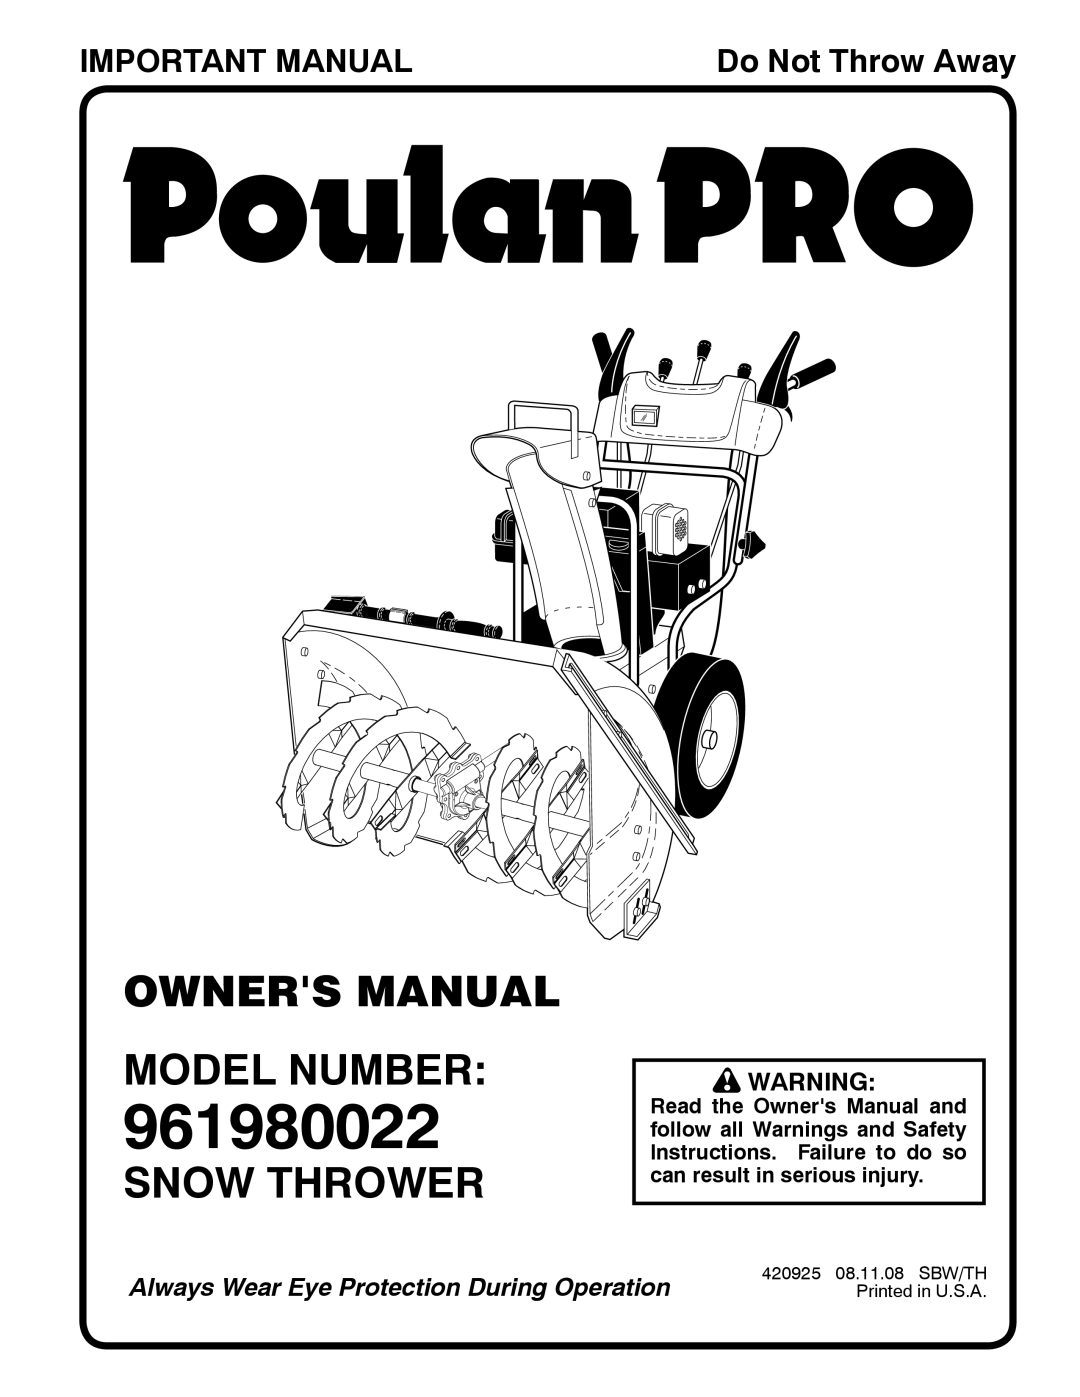 Poulan 961980022, 420925 owner manual Owners Manual Model Number, Snow Thrower, Important Manual, Do Not Throw Away 